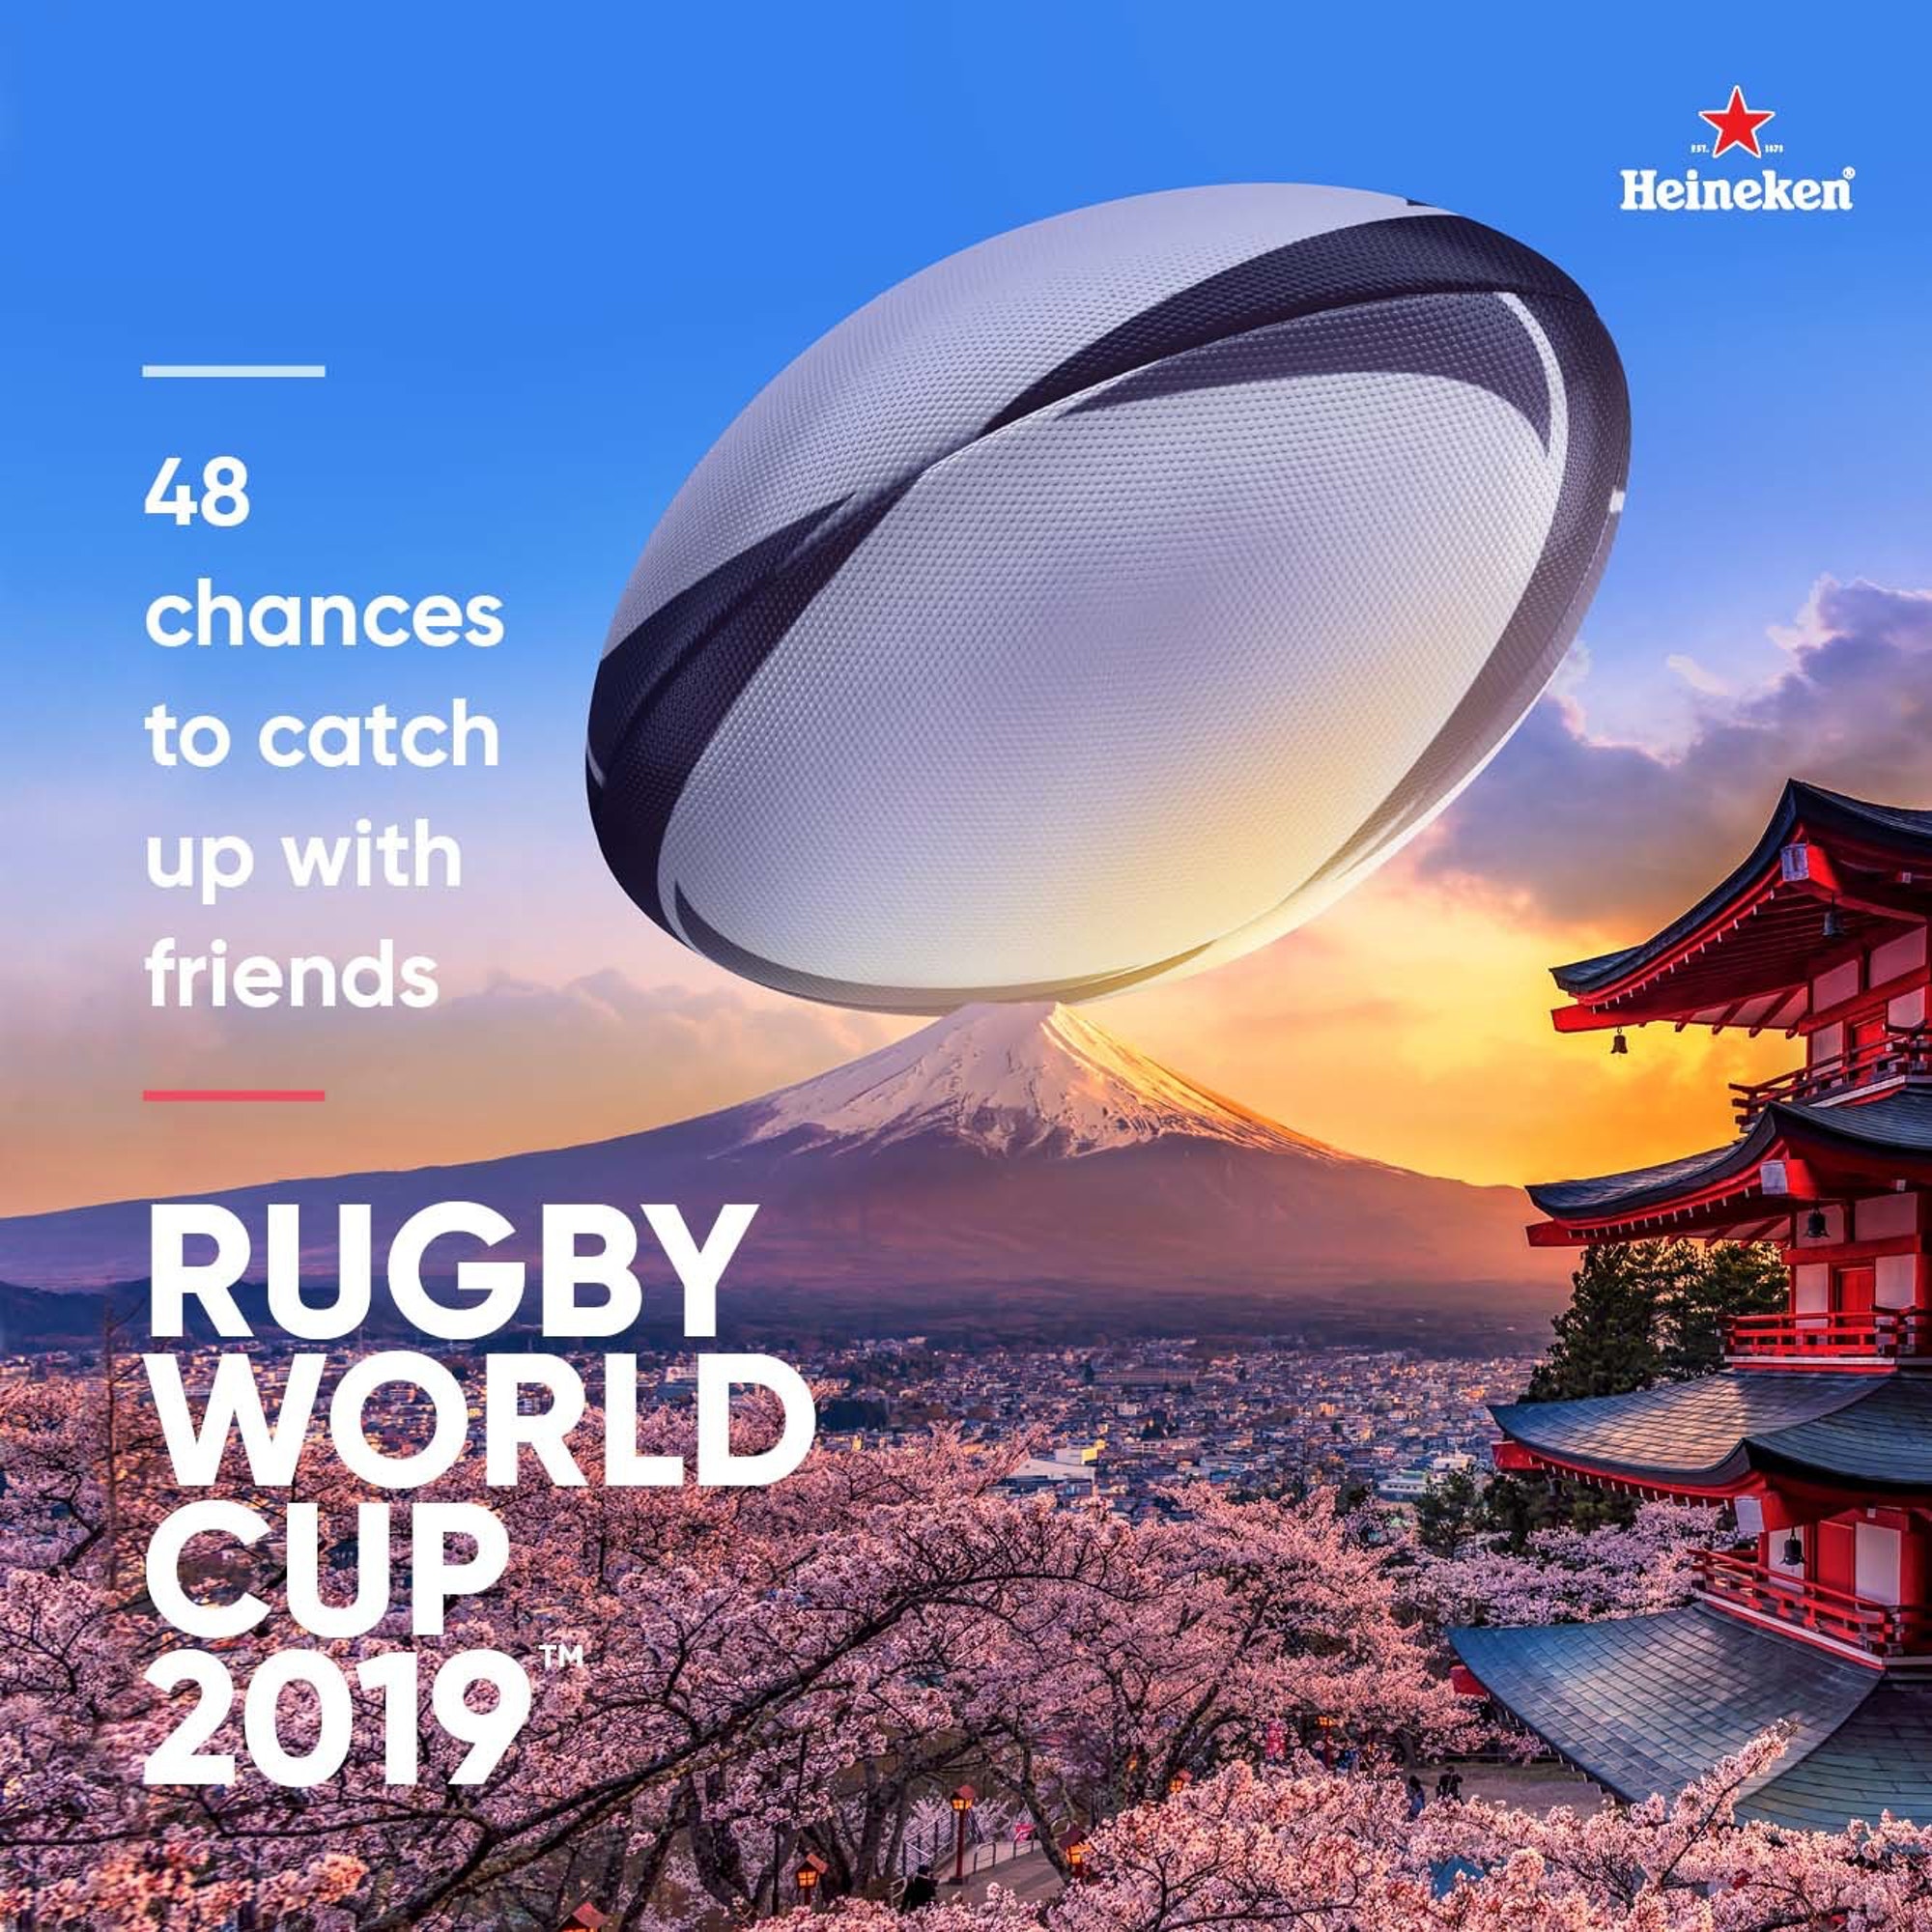 Joylab Have You Covered This Rugby World Cup!